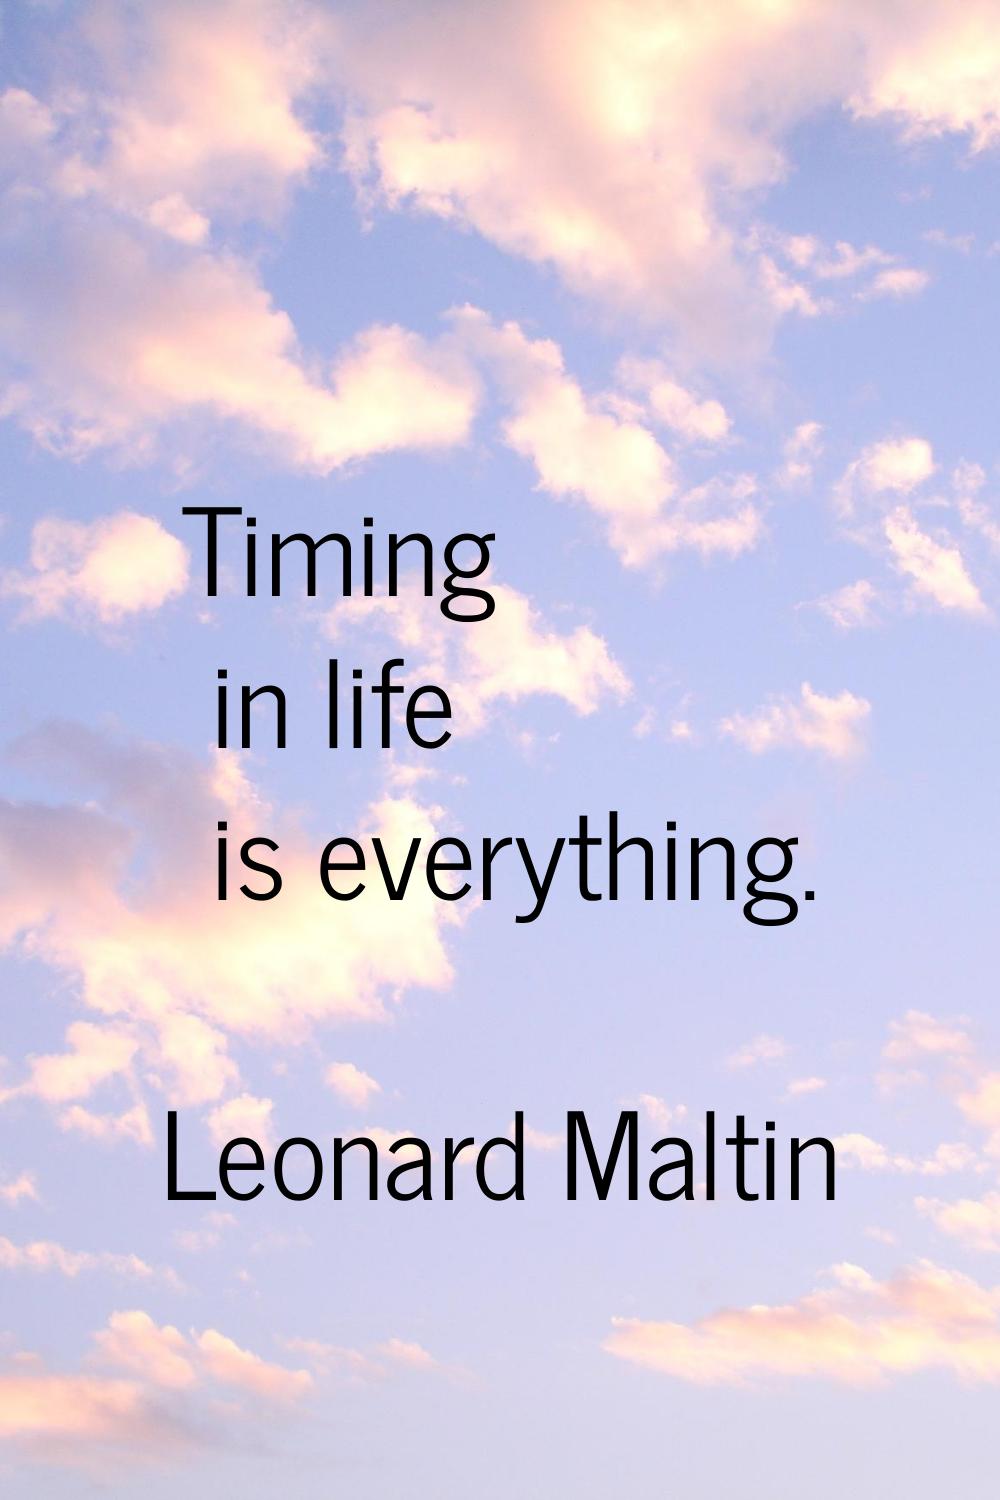 Timing in life is everything.